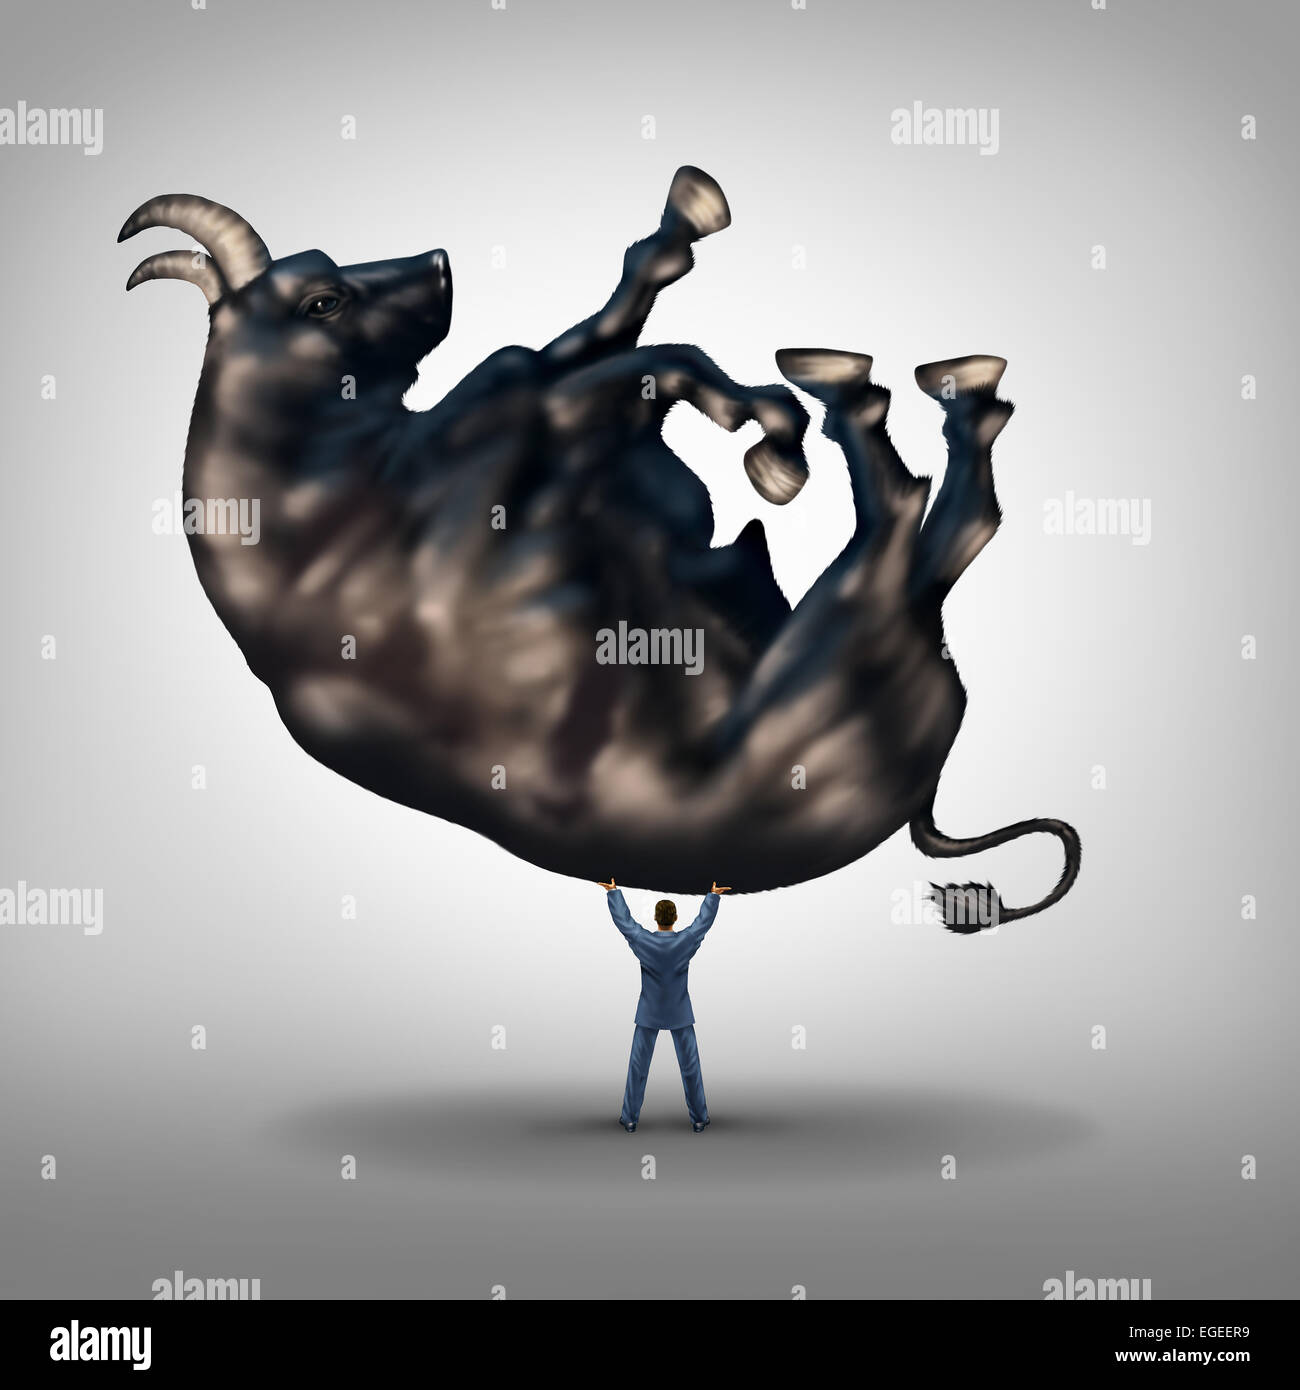 Investing solutions and financial leadership symbol and business success concept as a take charge businessman lifting a giant bull as an icon of a leader with taking control of wealth management. Stock Photo